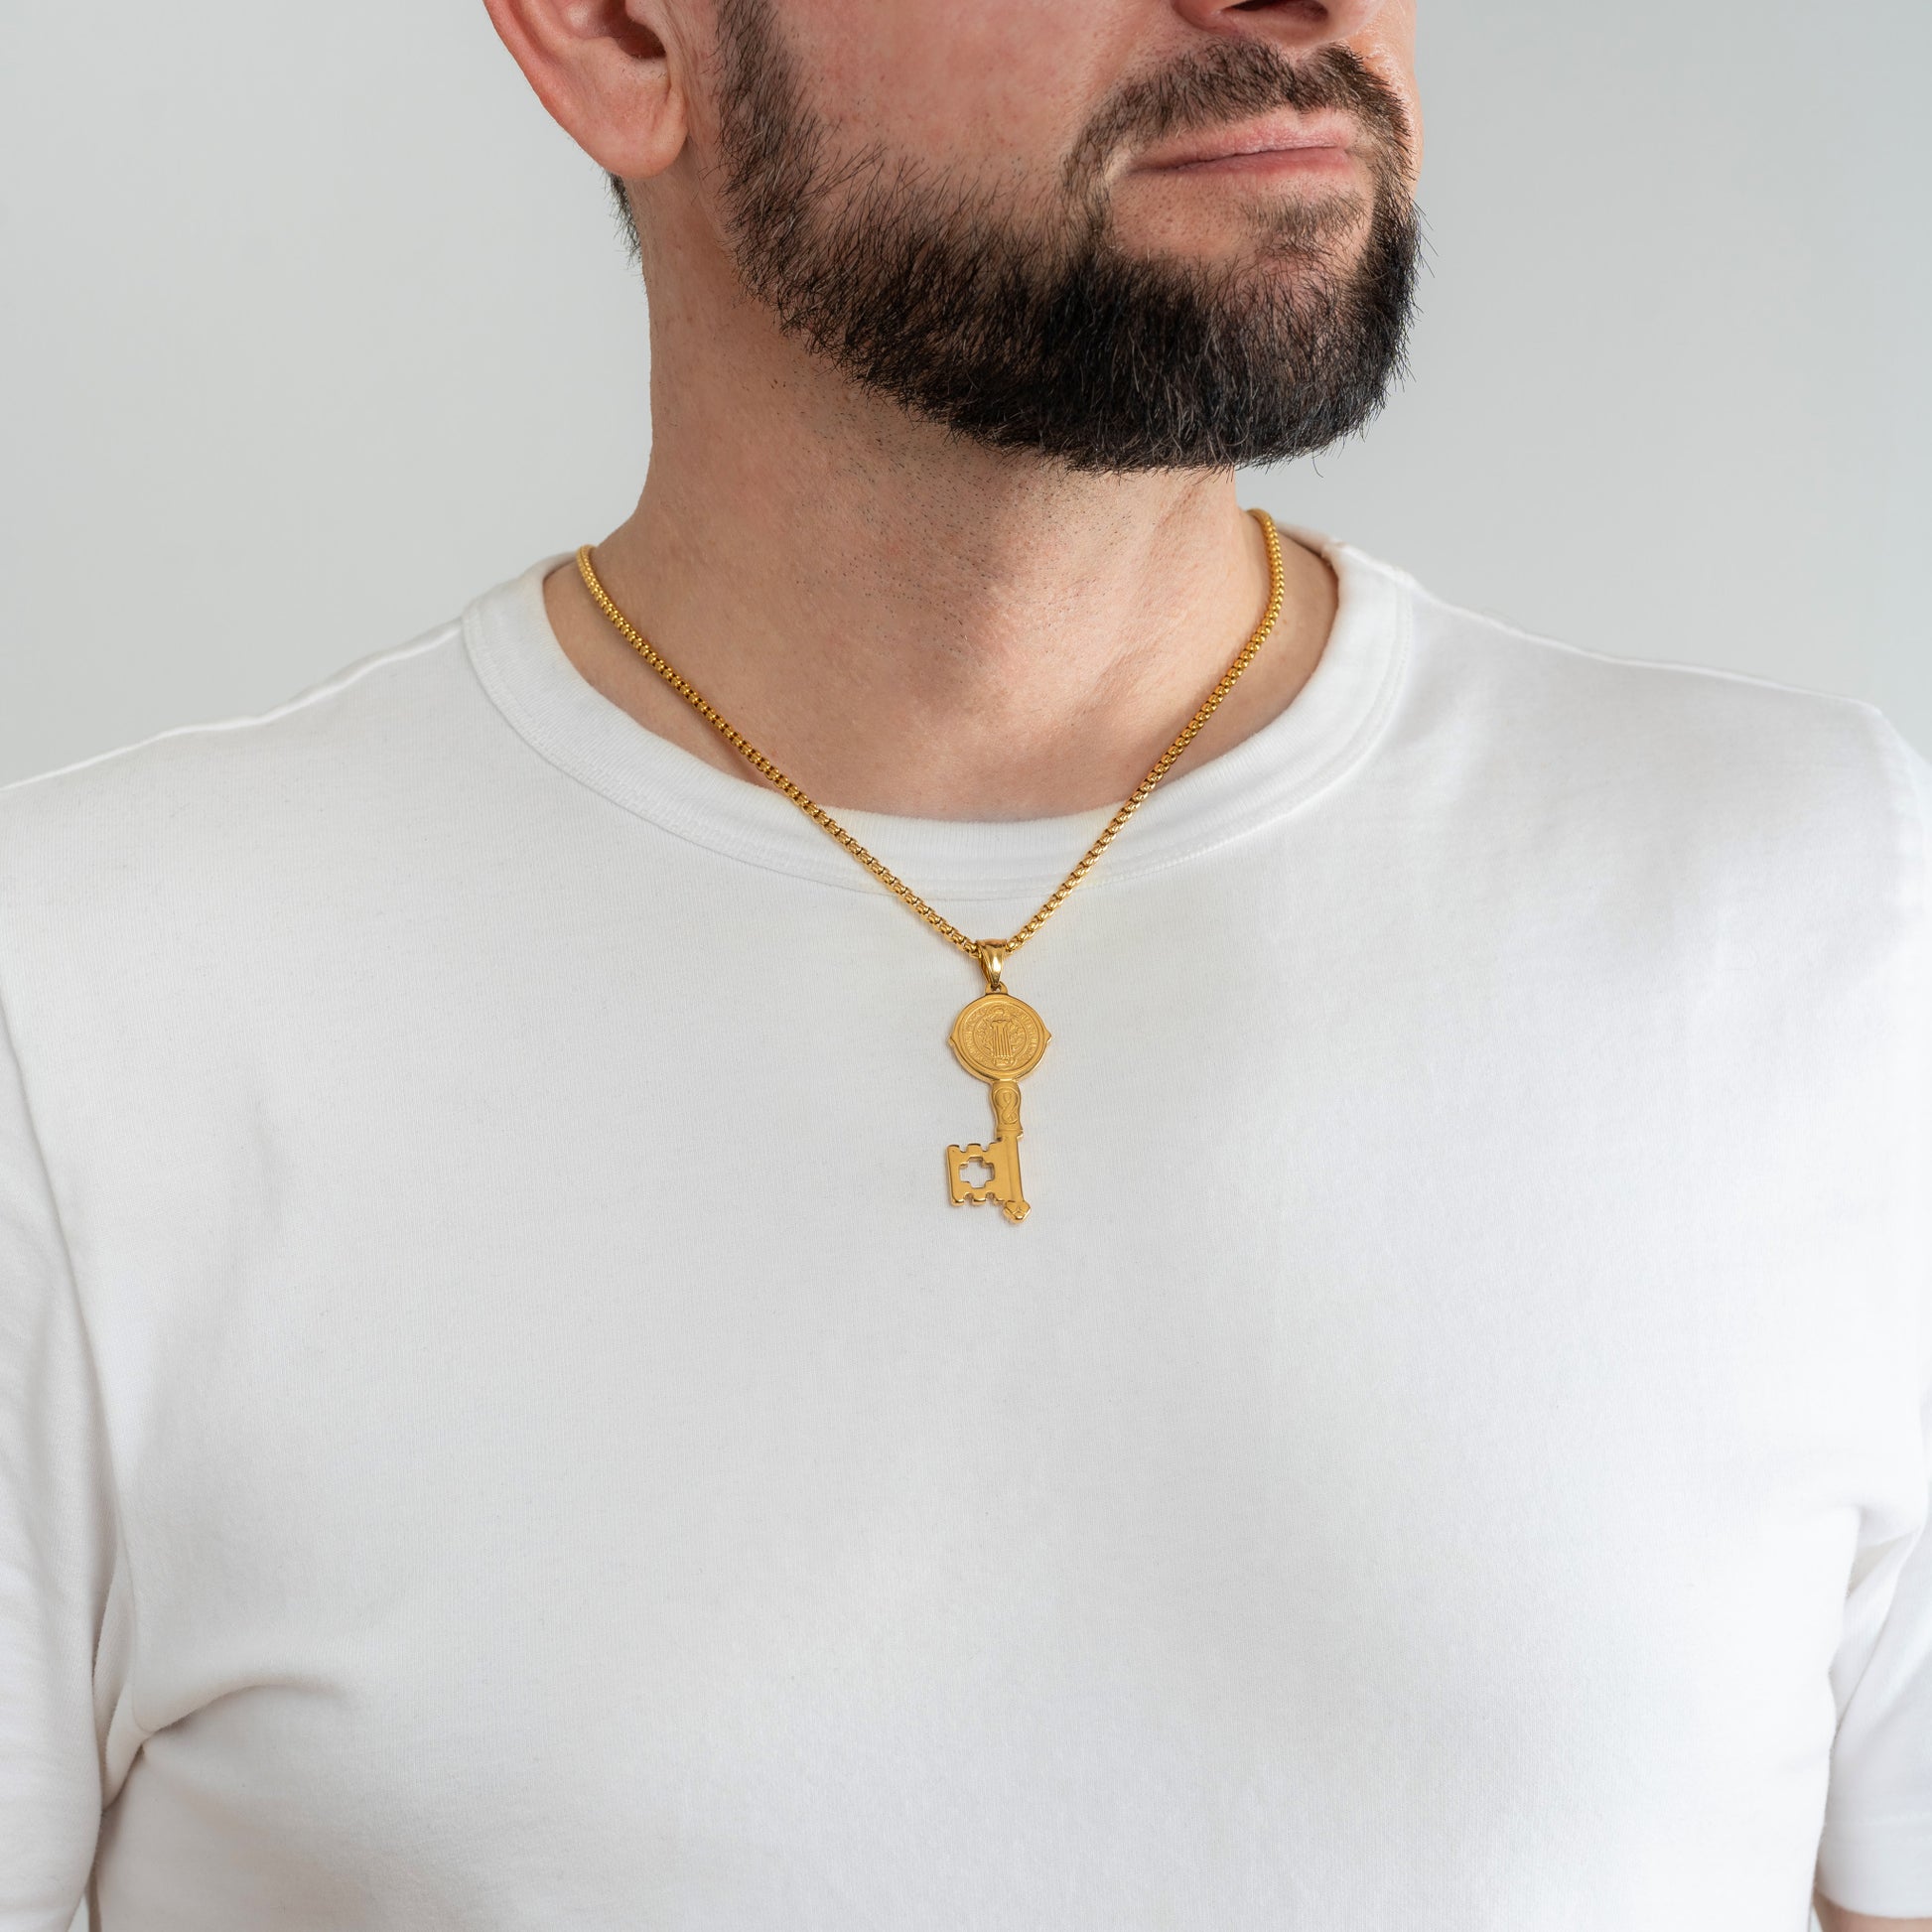 A male model in a white t-shirt wearing a St. Benedict Key Gold Pendant with a 3mm Gold Round Box link chain 22 inches.